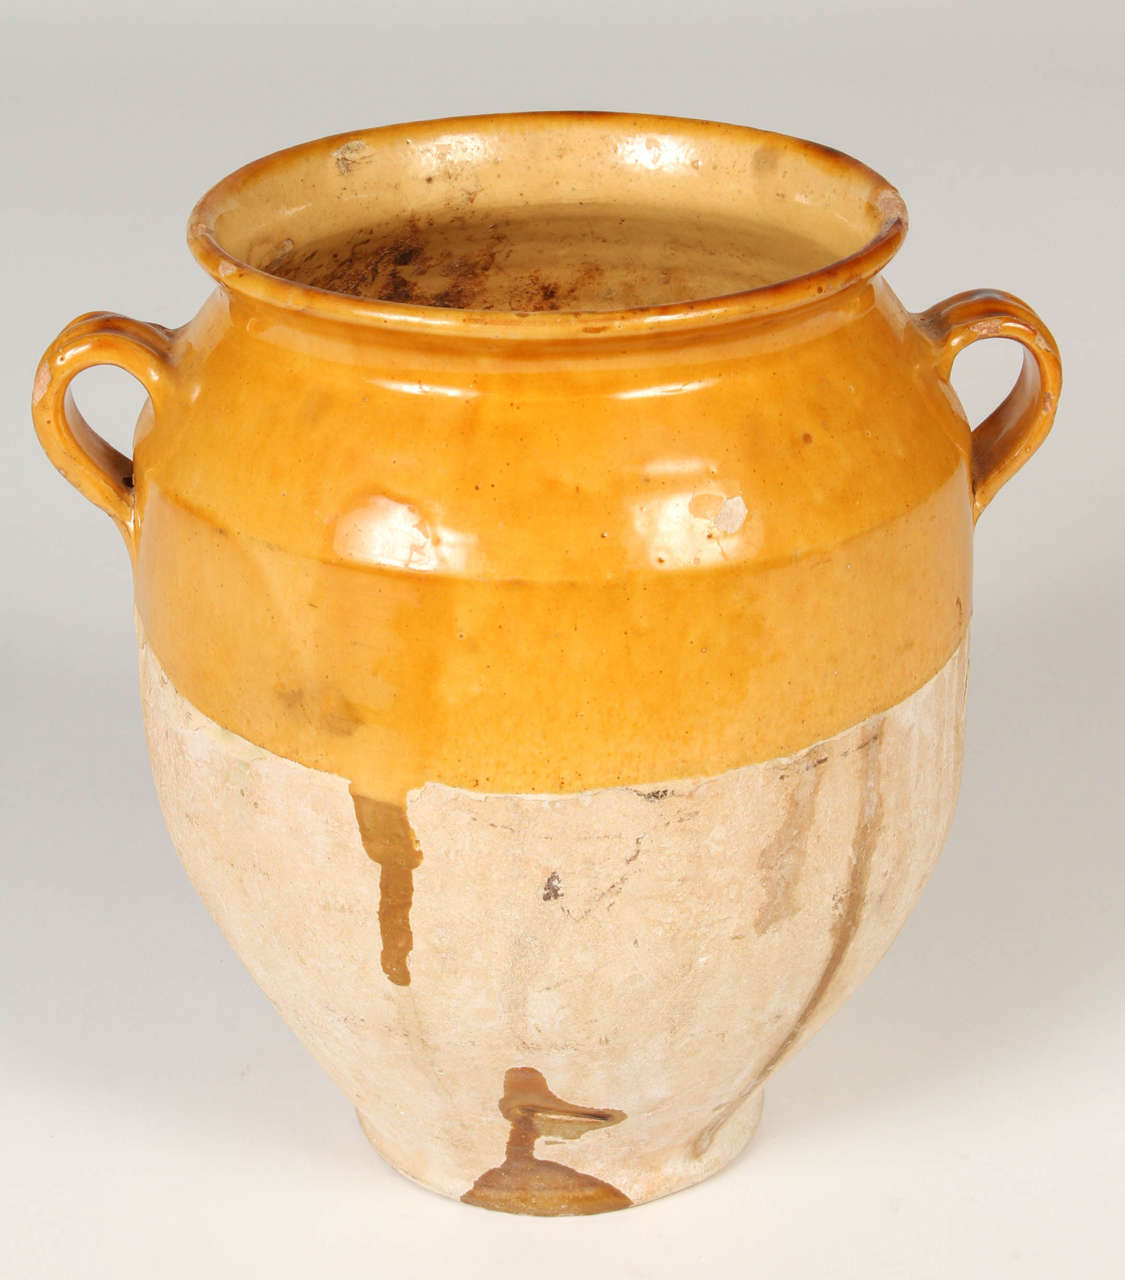 19th Century confit pot with colourful glaze in ochre on the top half and unglazed on the bottom. Earthy weathered patina. Nice as a decorative piece for use indoors or in a garden or on a terrace. Large enough for use as a planter for a small